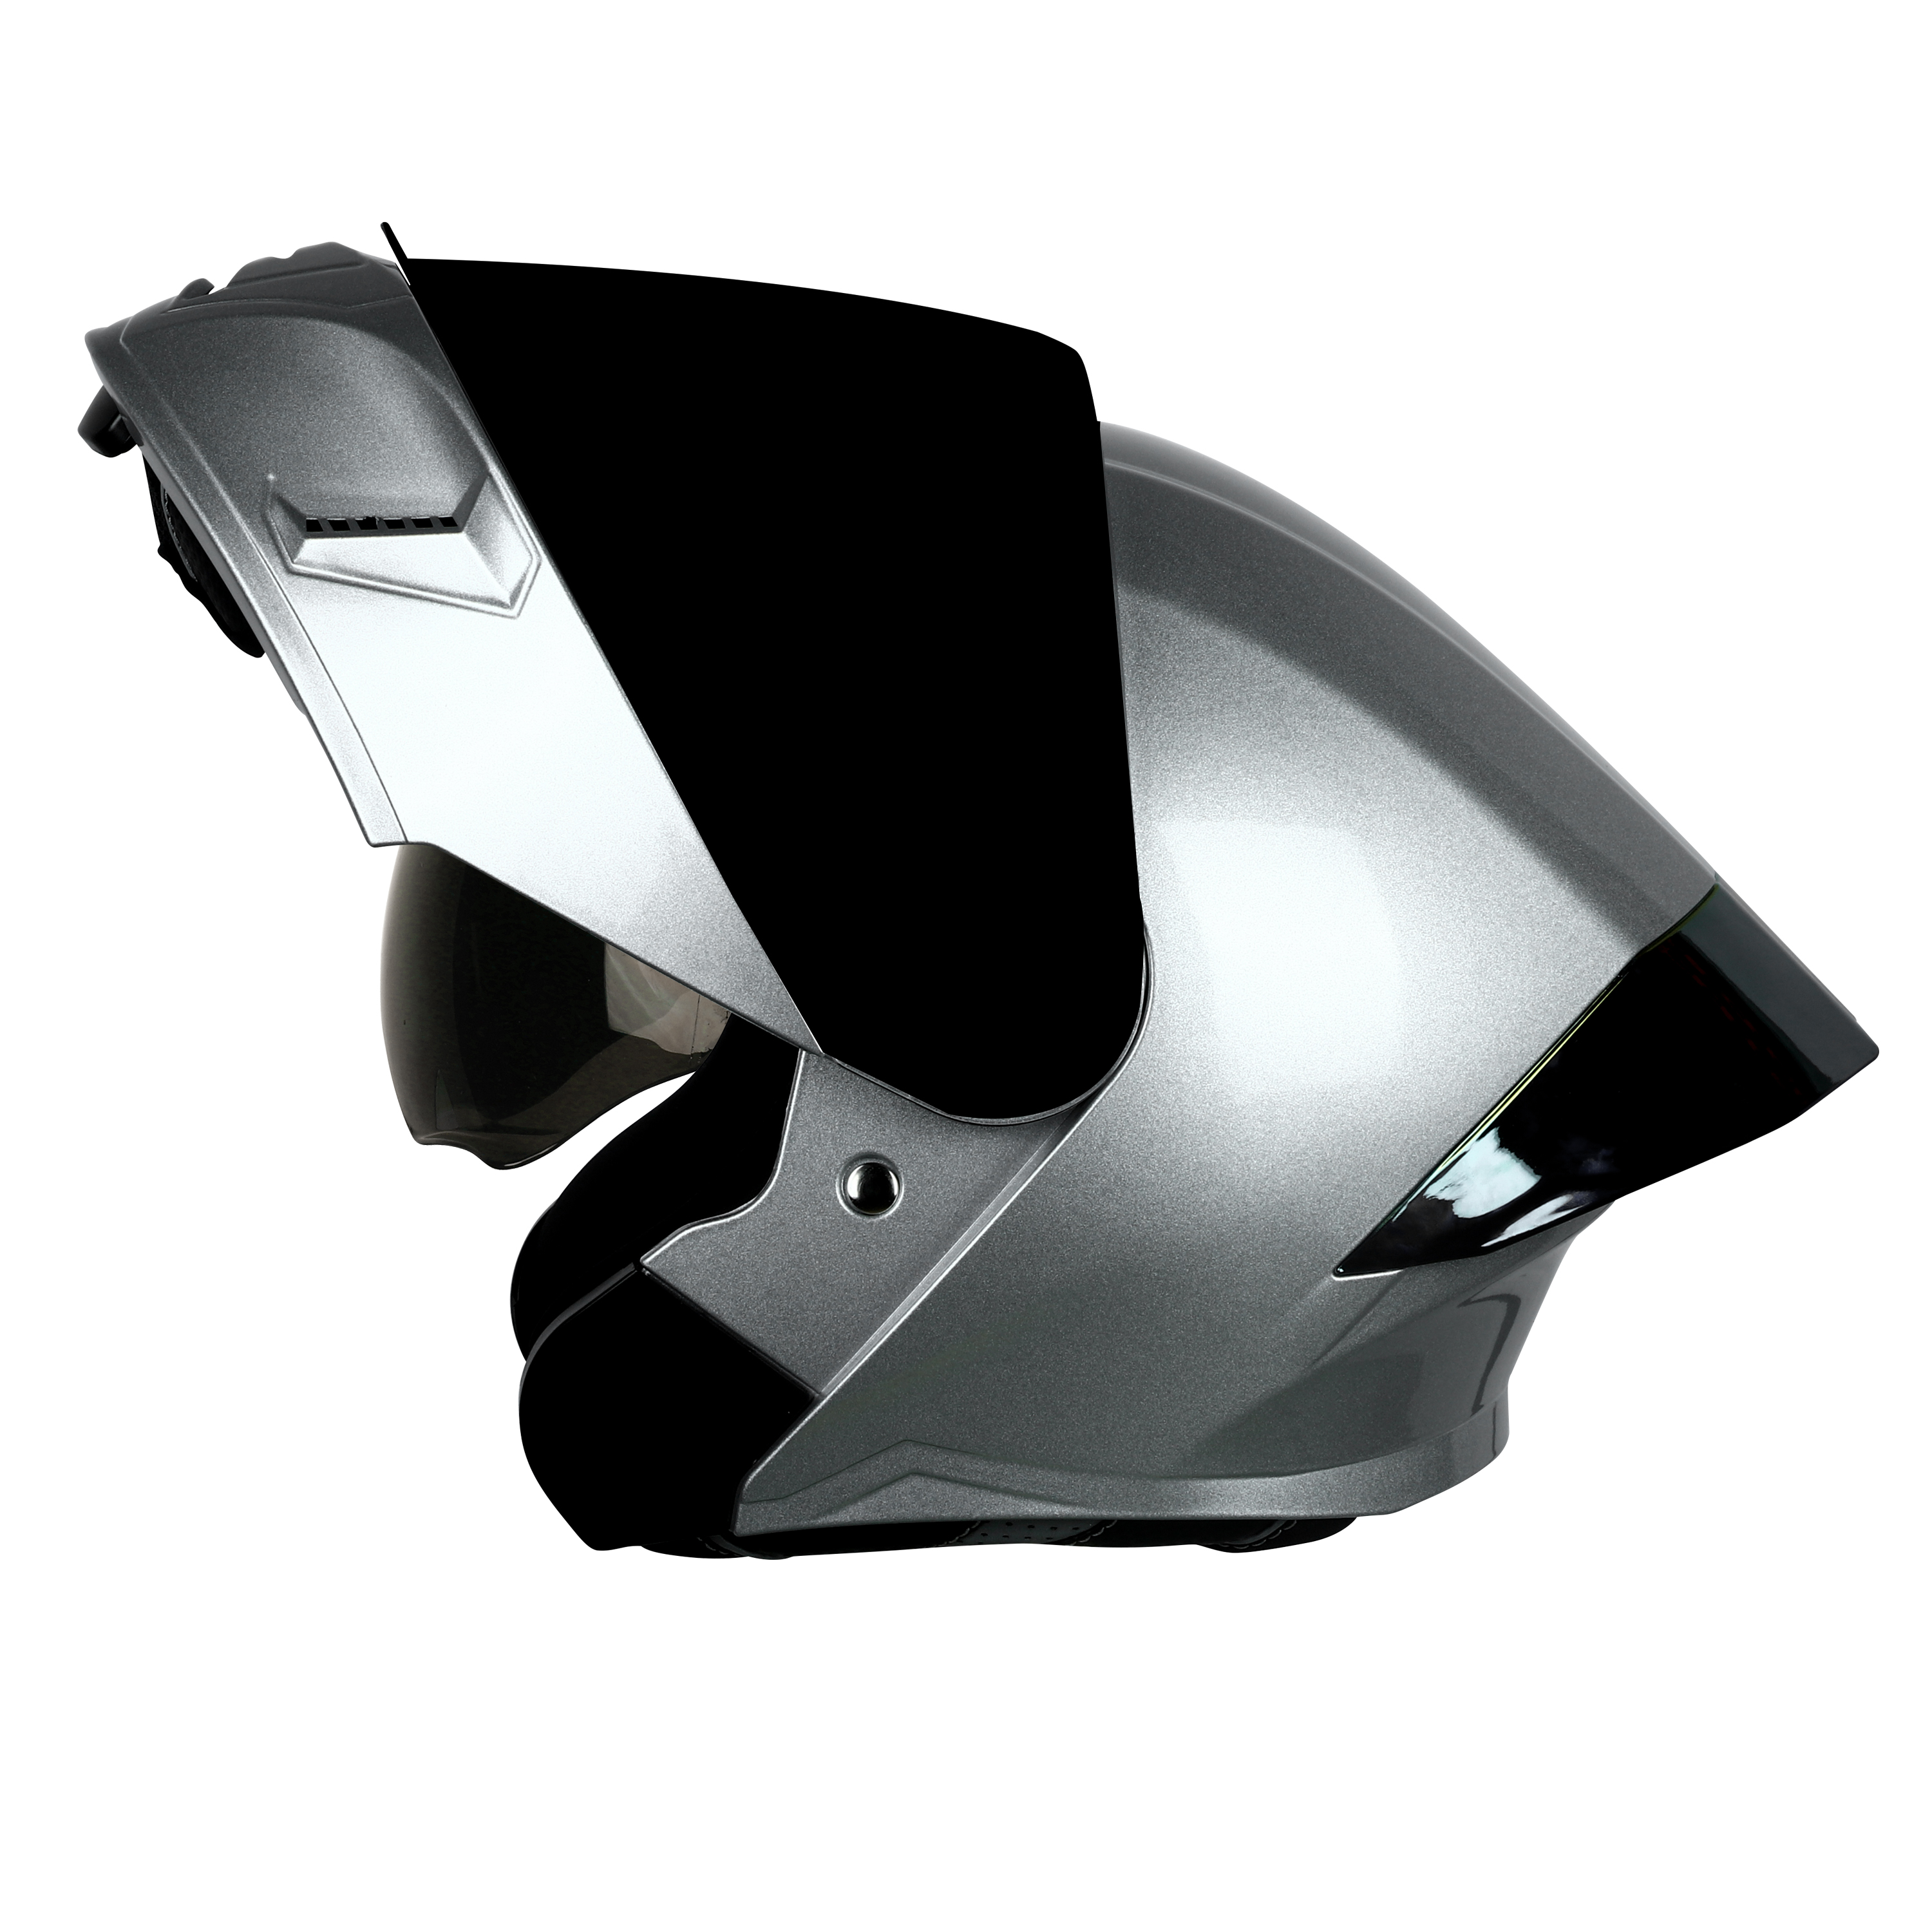 Steelbird SBA-20 7Wings ISI Certified Flip-Up Helmet With Black Spoiler For Men And Women With Inner Smoke Sun Shield (Glossy Silver With Smoke Visor)